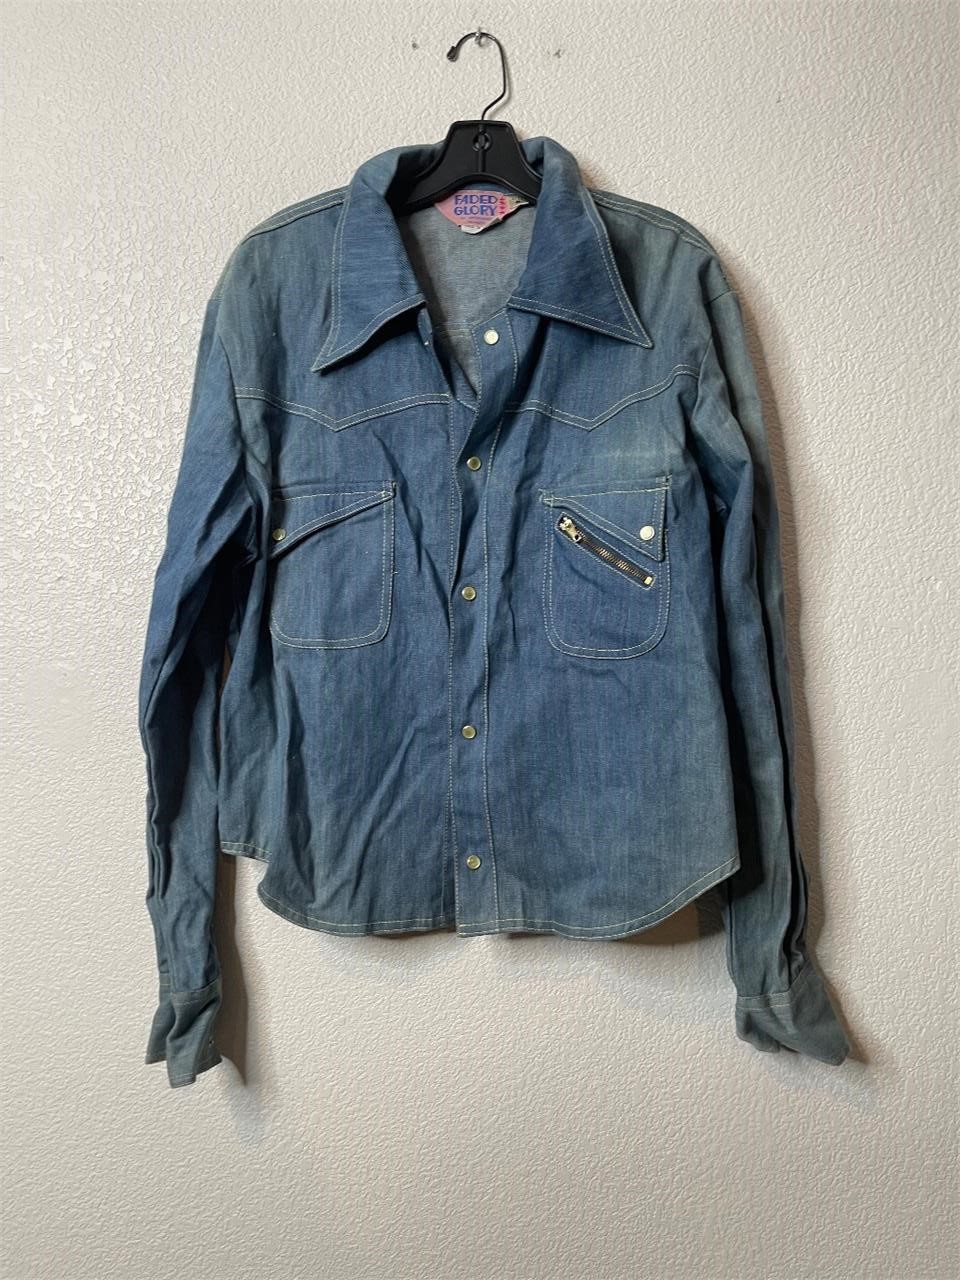 6/26/24 Vintage Clothing Auction